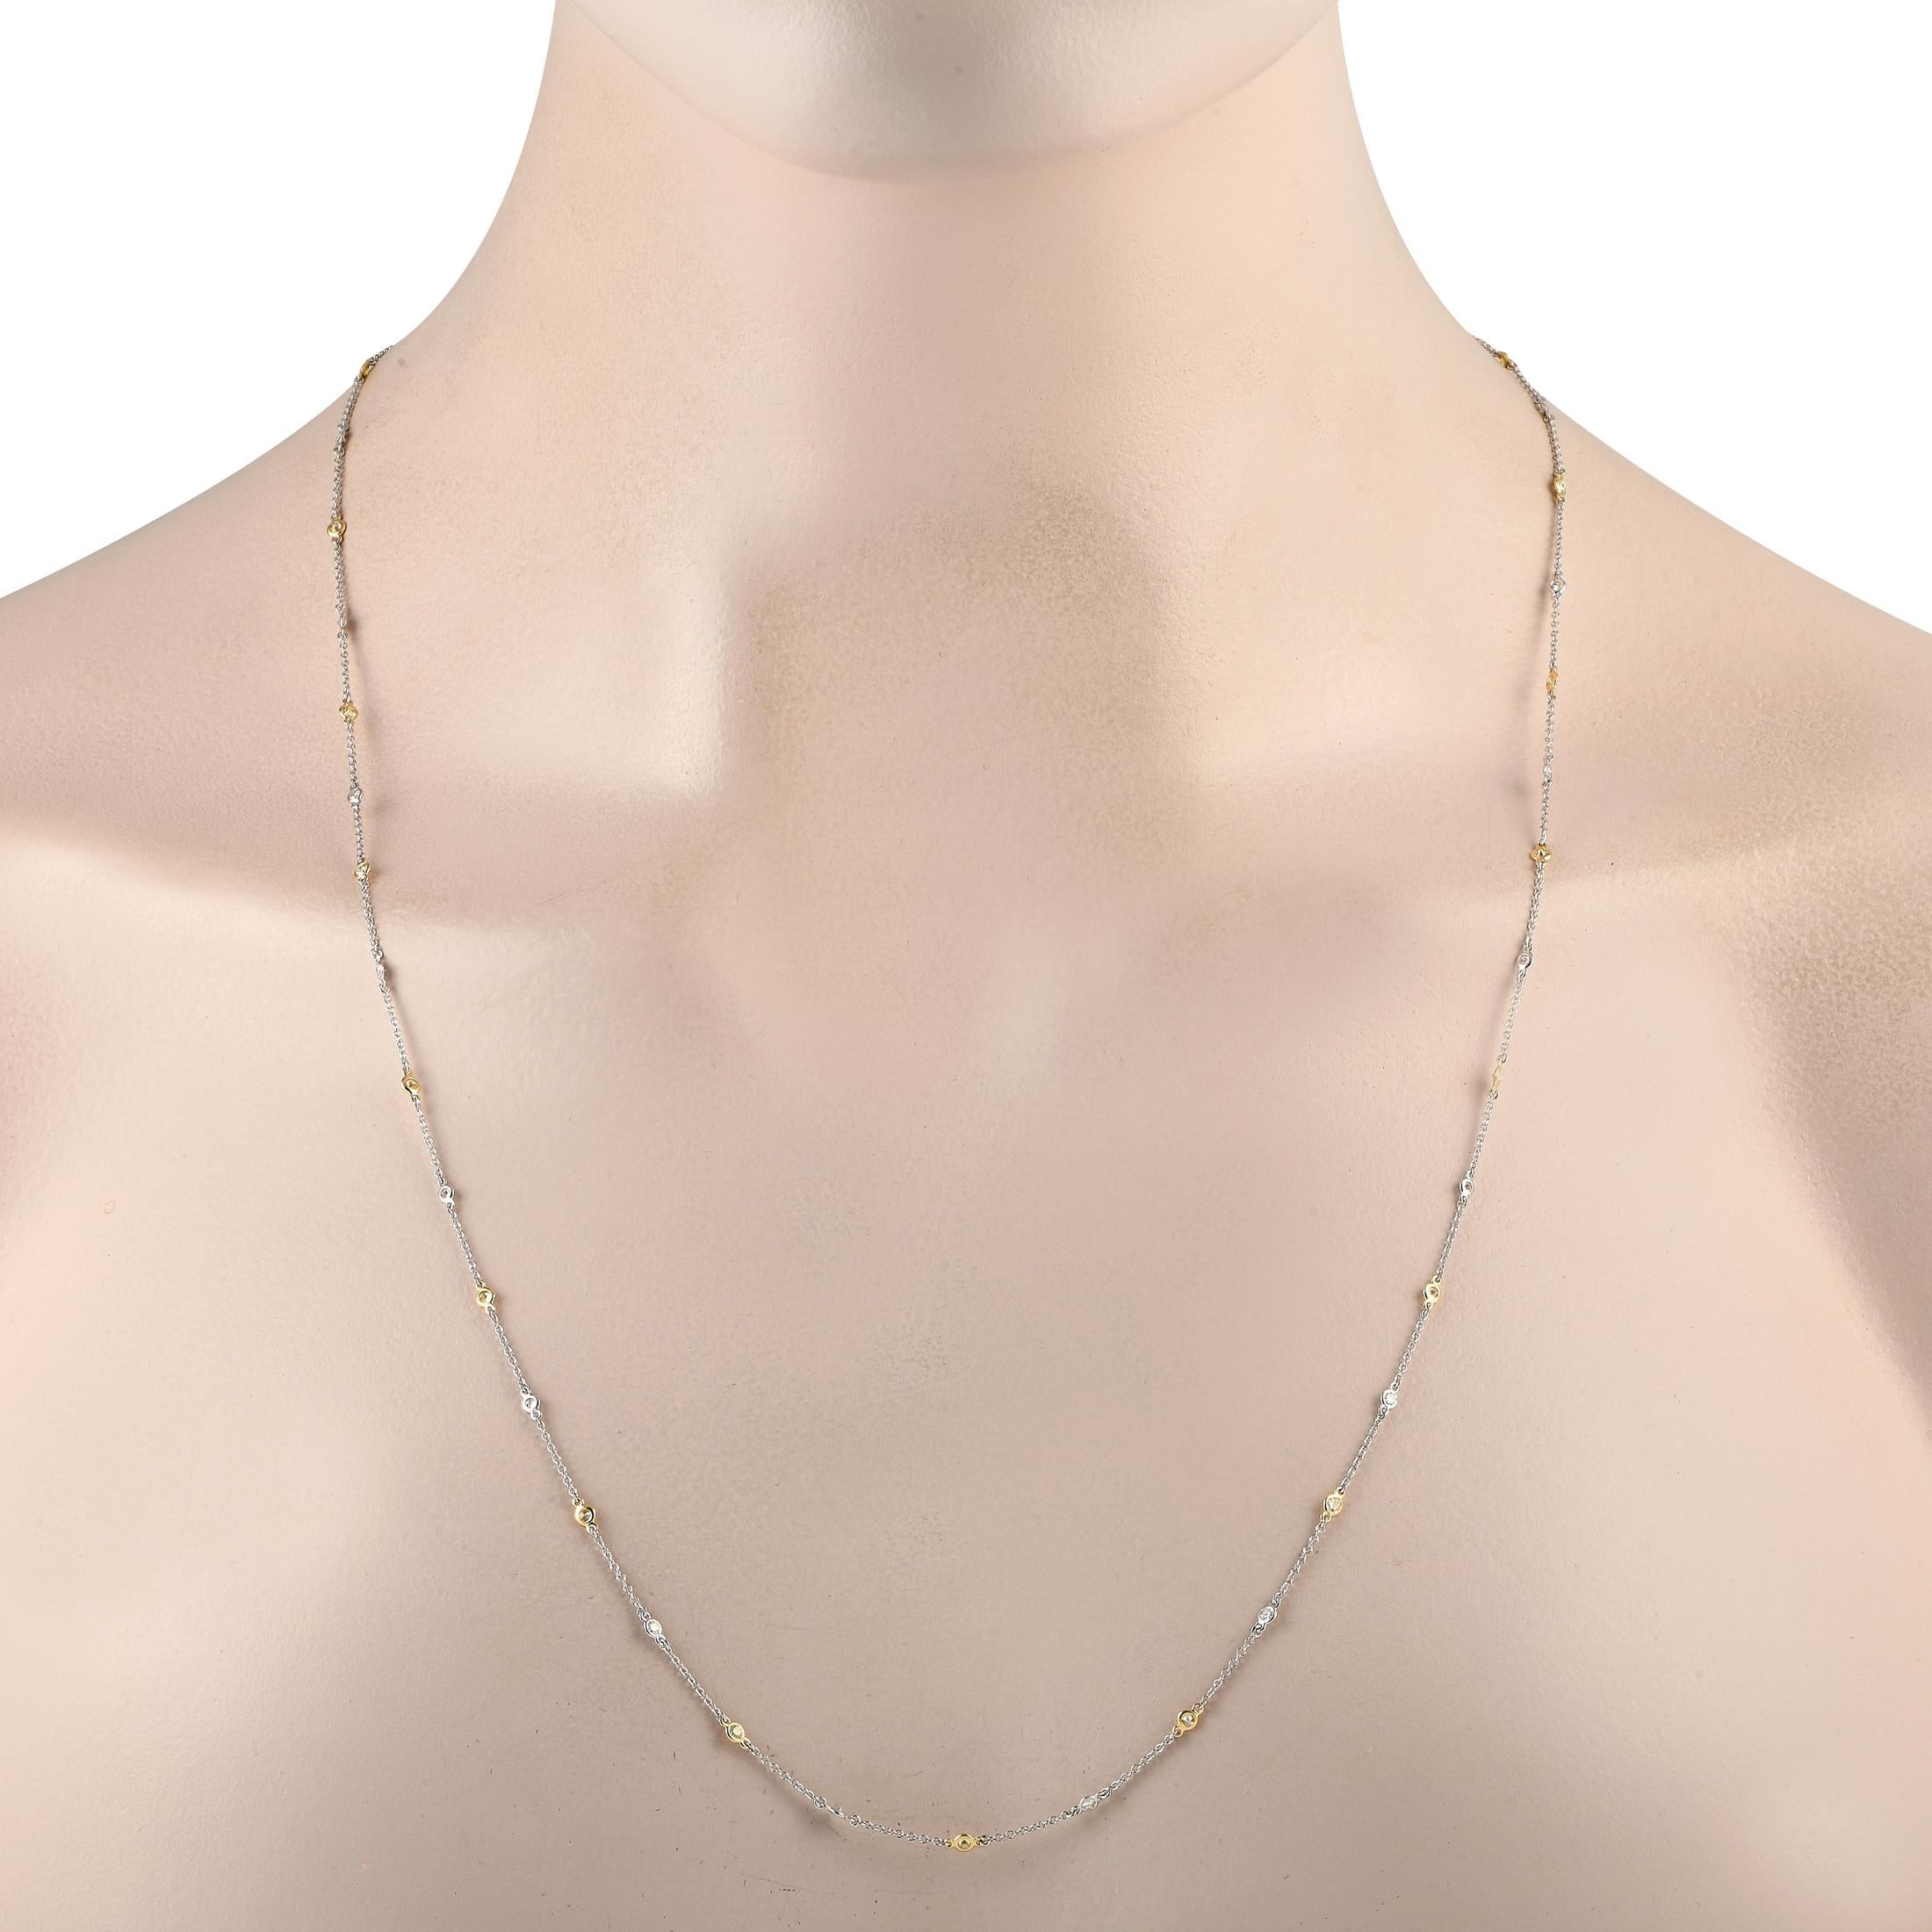 Whether worn alone or layered with other dainty pieces, this two-toned diamond station necklace can surely enhance the look of different outfits. This LB Exclusive piece features a 26-long chain in 18K white gold, punctuated at evenly-set stations